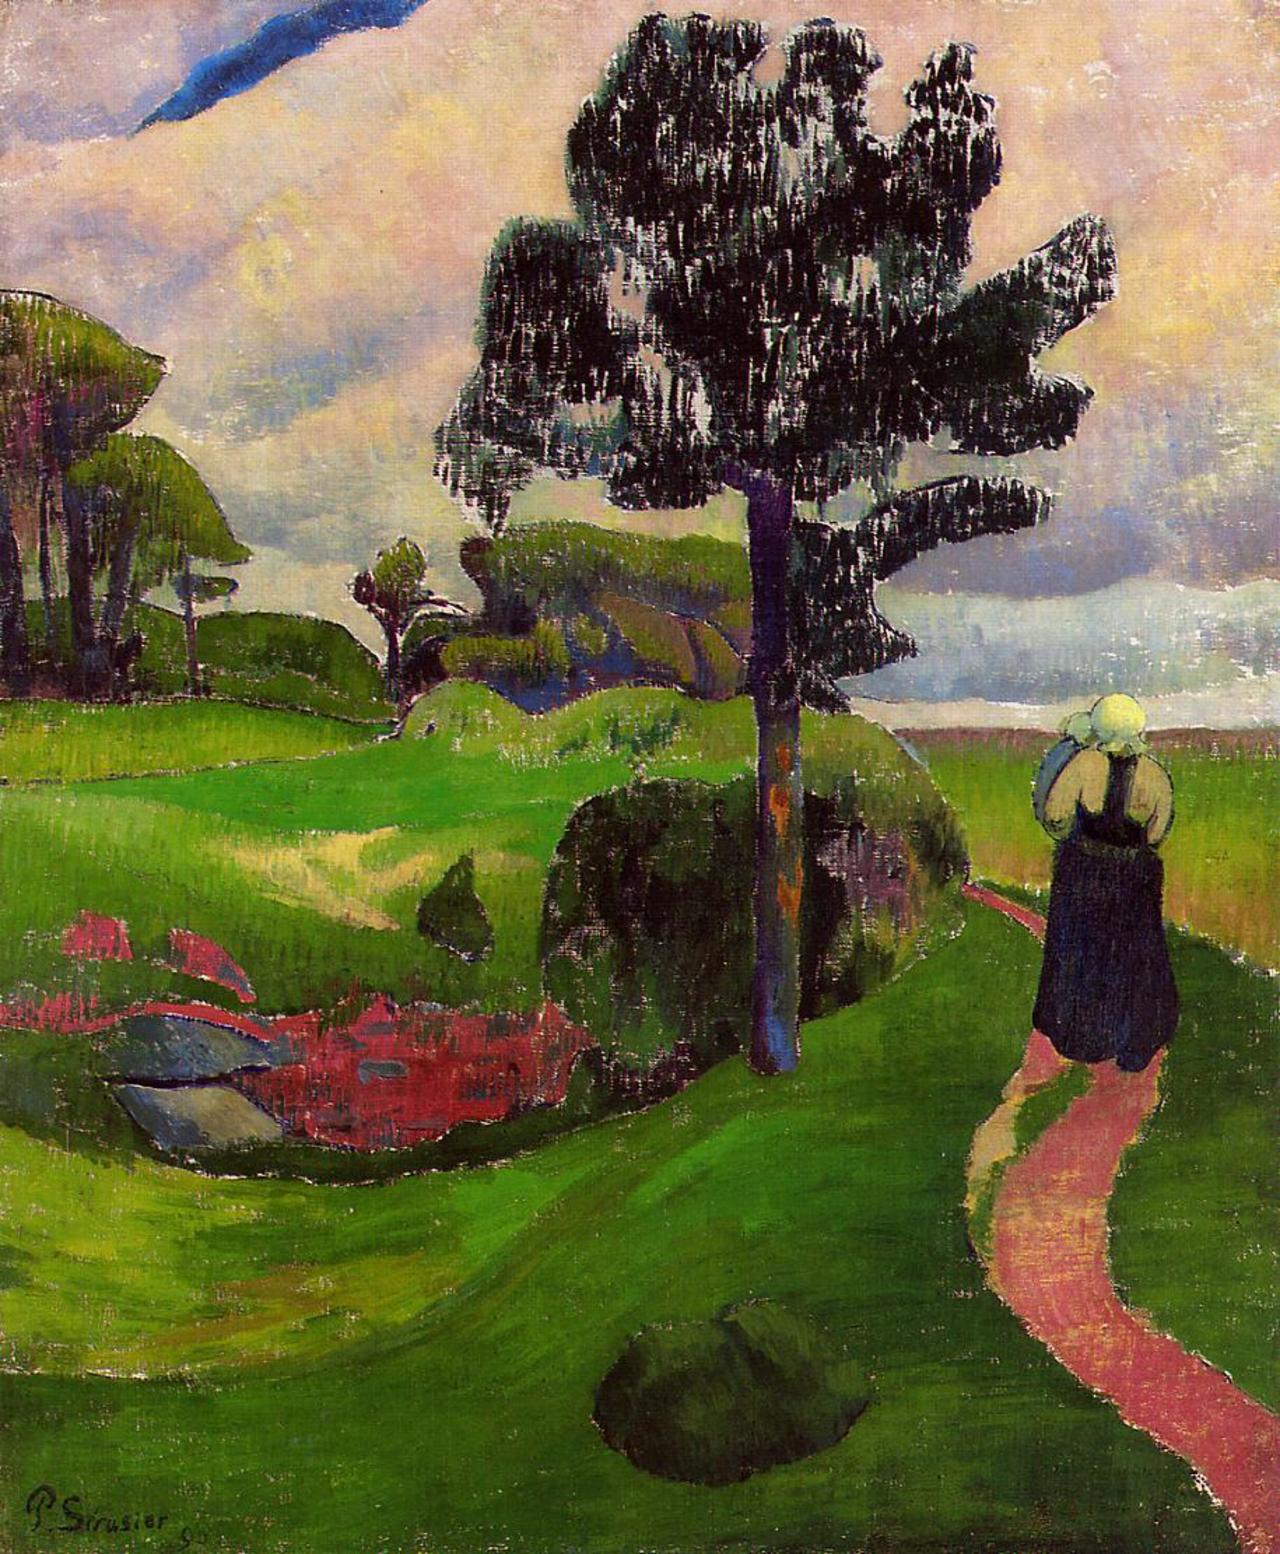 Paul #Serusier - Mother and Child on a Breton Landscape 1890 http://t.co/GBLpvq3xV4